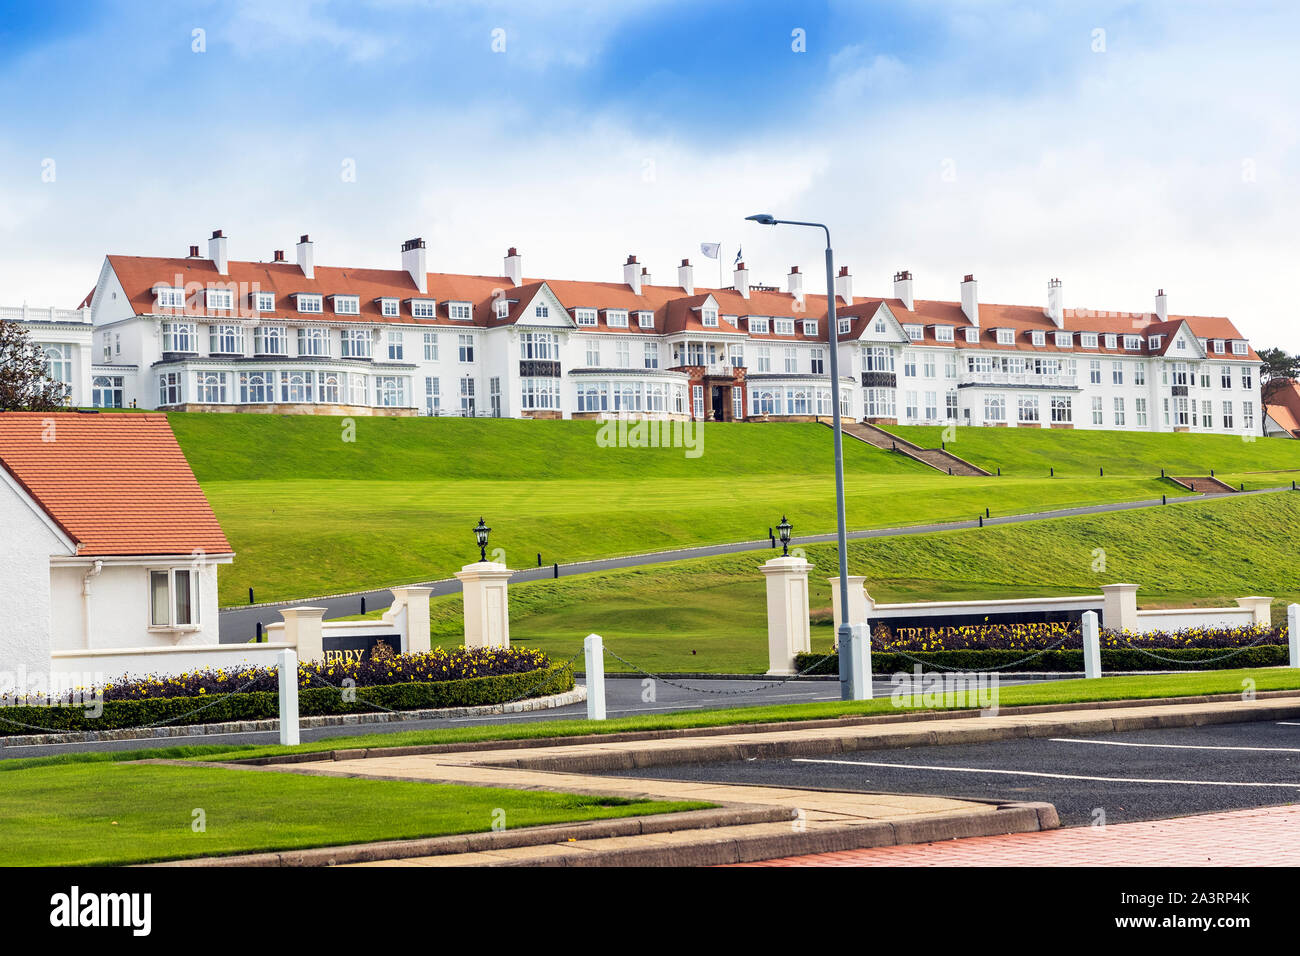 Hotel complex and access road at Trump Turnberry hotel and golf complex, Turnberry, Ayrshire, Scotland, UK Stock Photo